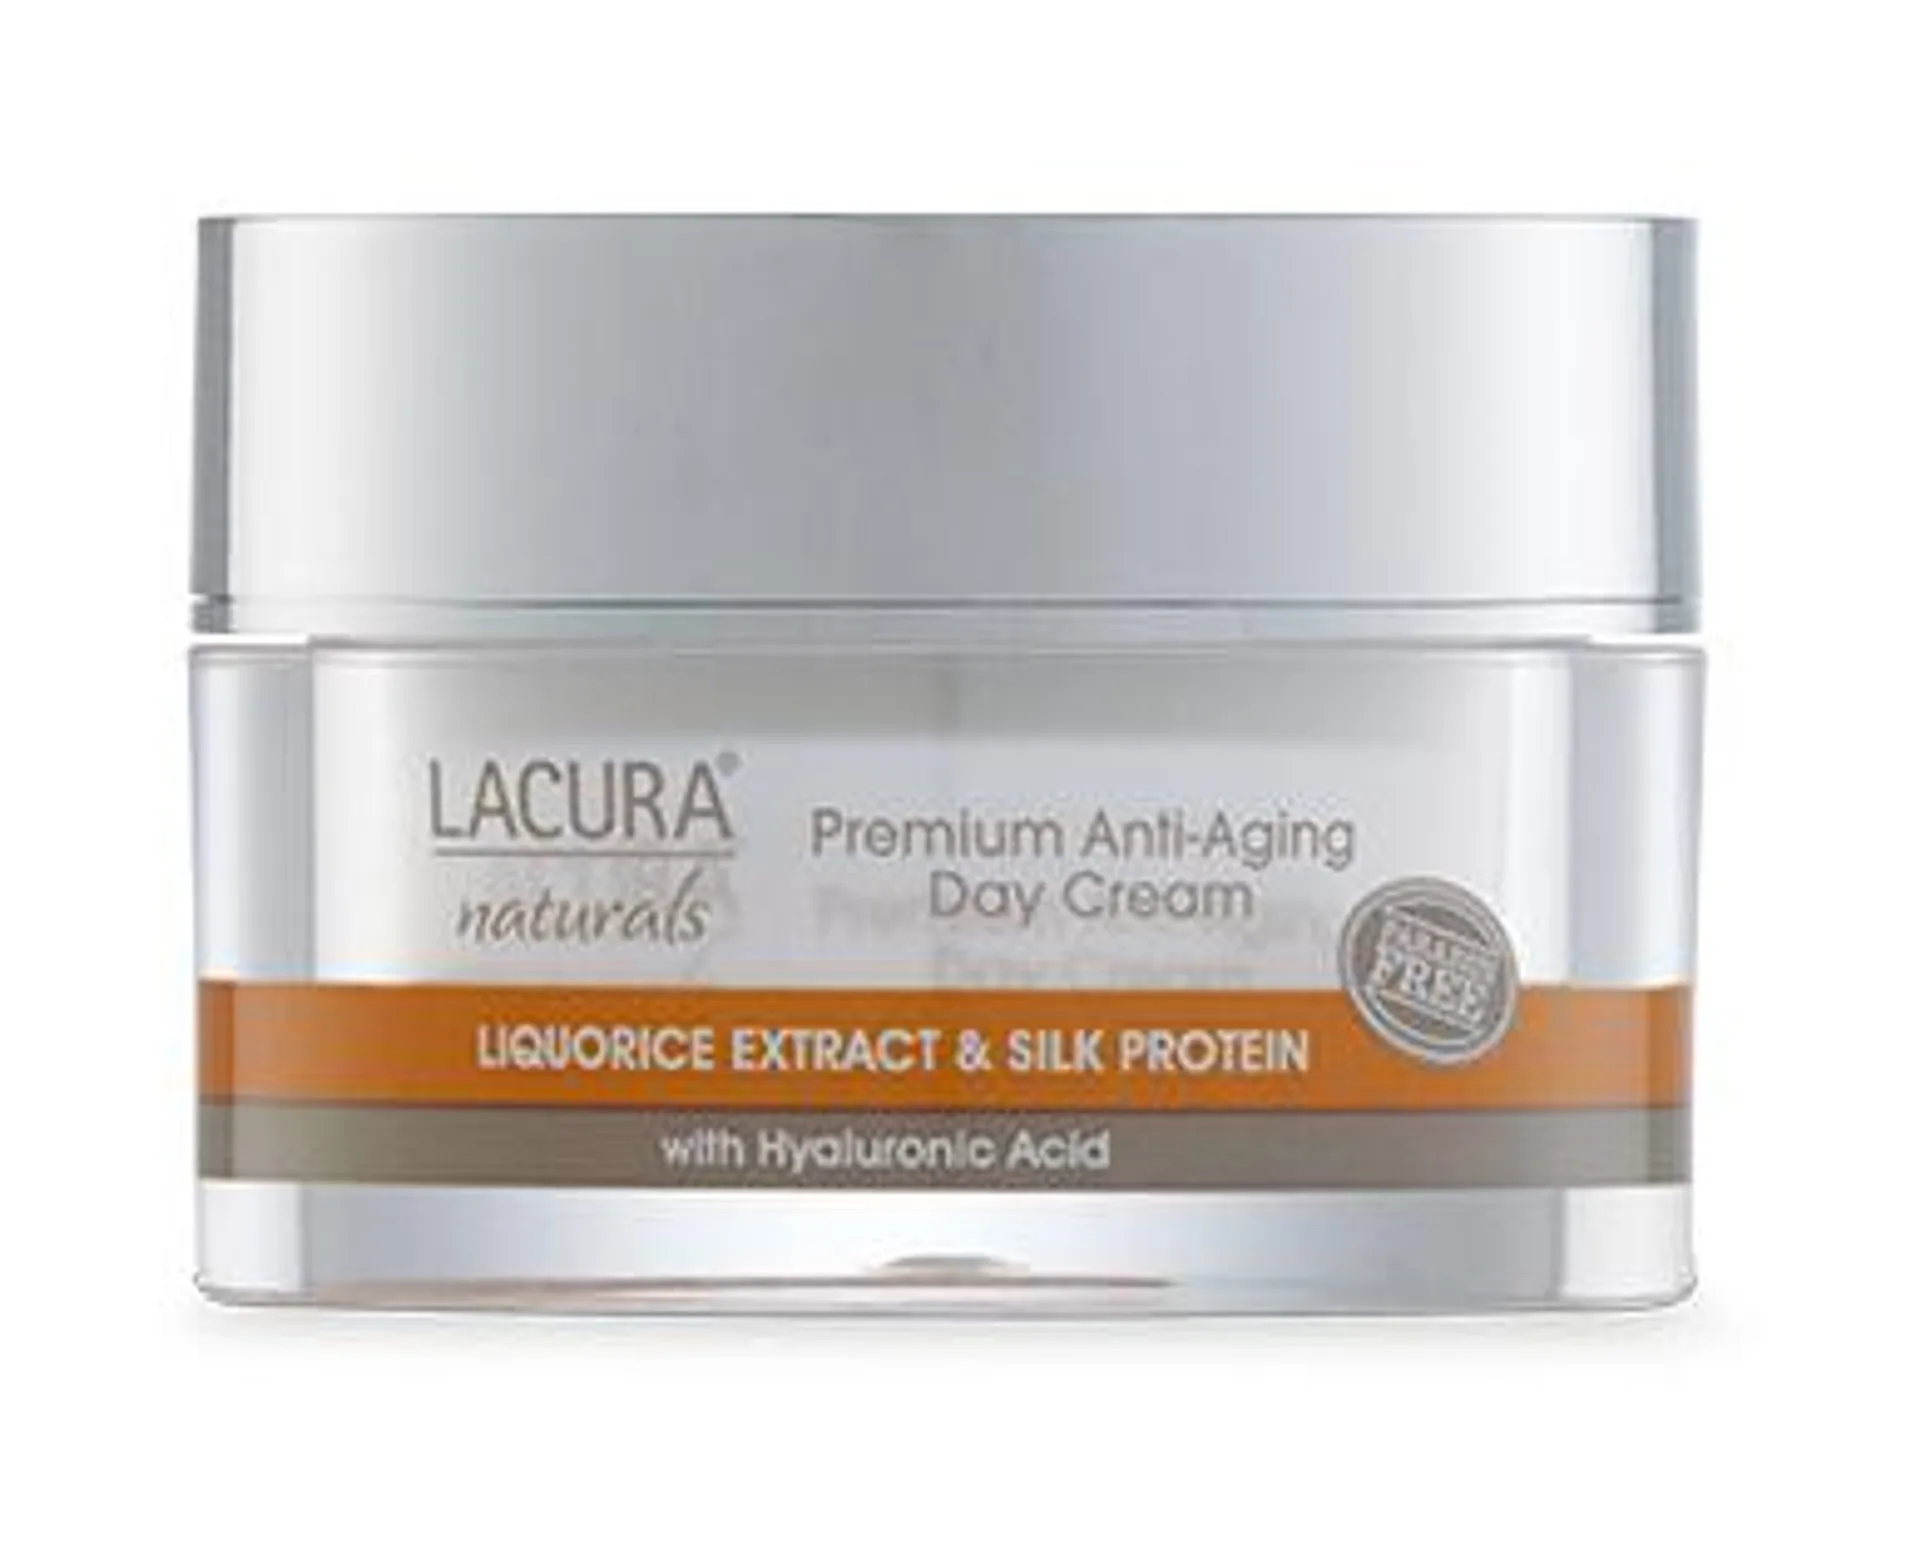 LACURA ® Naturals Anti-Aging Day Cream with Liquorice Extract Oil & Silk Protein 50ml